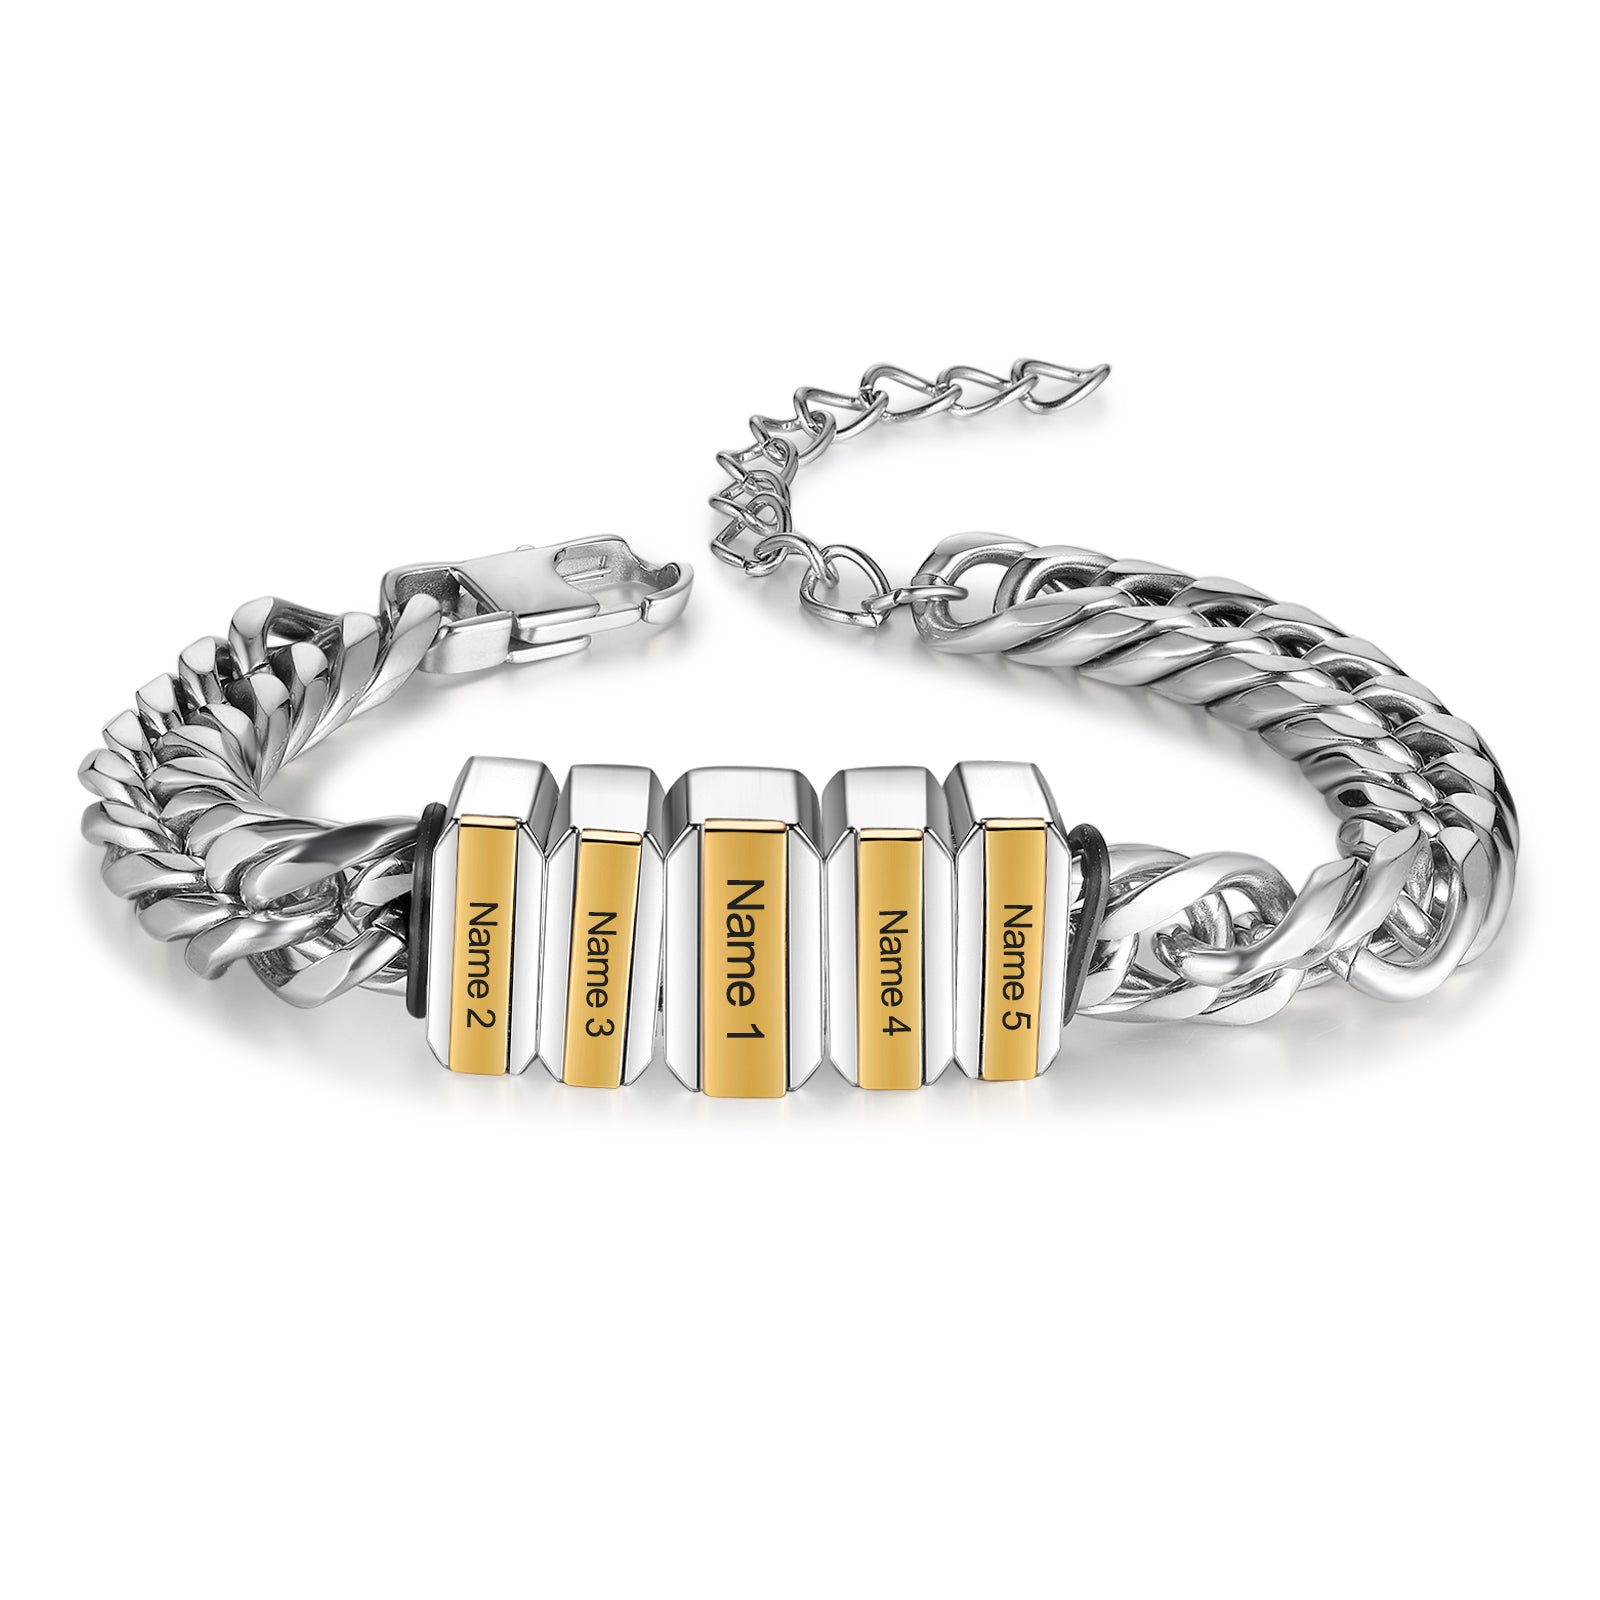 Father's Day Gift Cuban Link Men's Bracelet With Personalized Beads